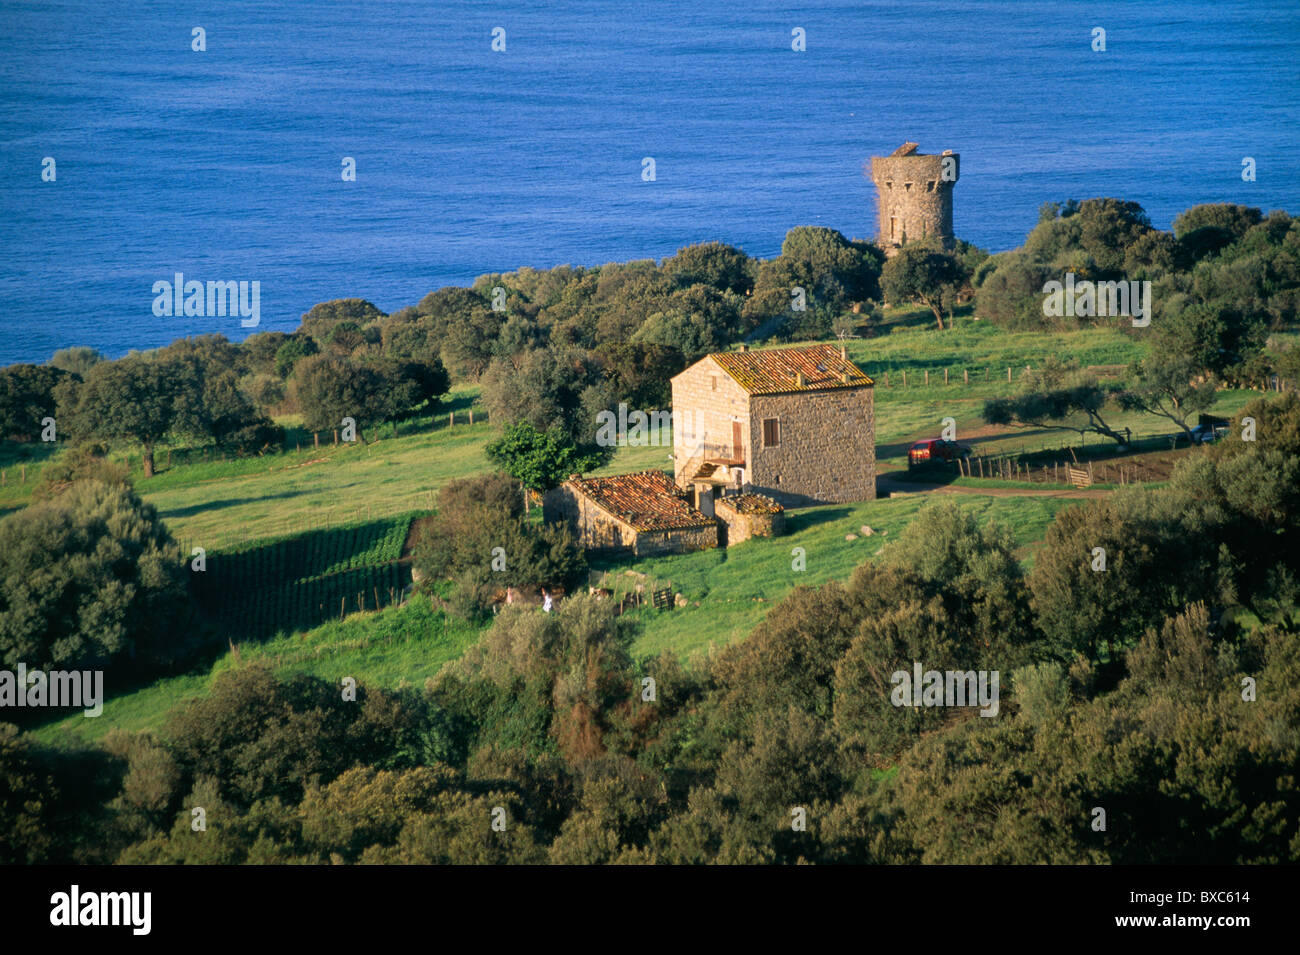 France, Corsica, Corse du Sud, Calanca Tower and Gulf of Valinco Stock Photo